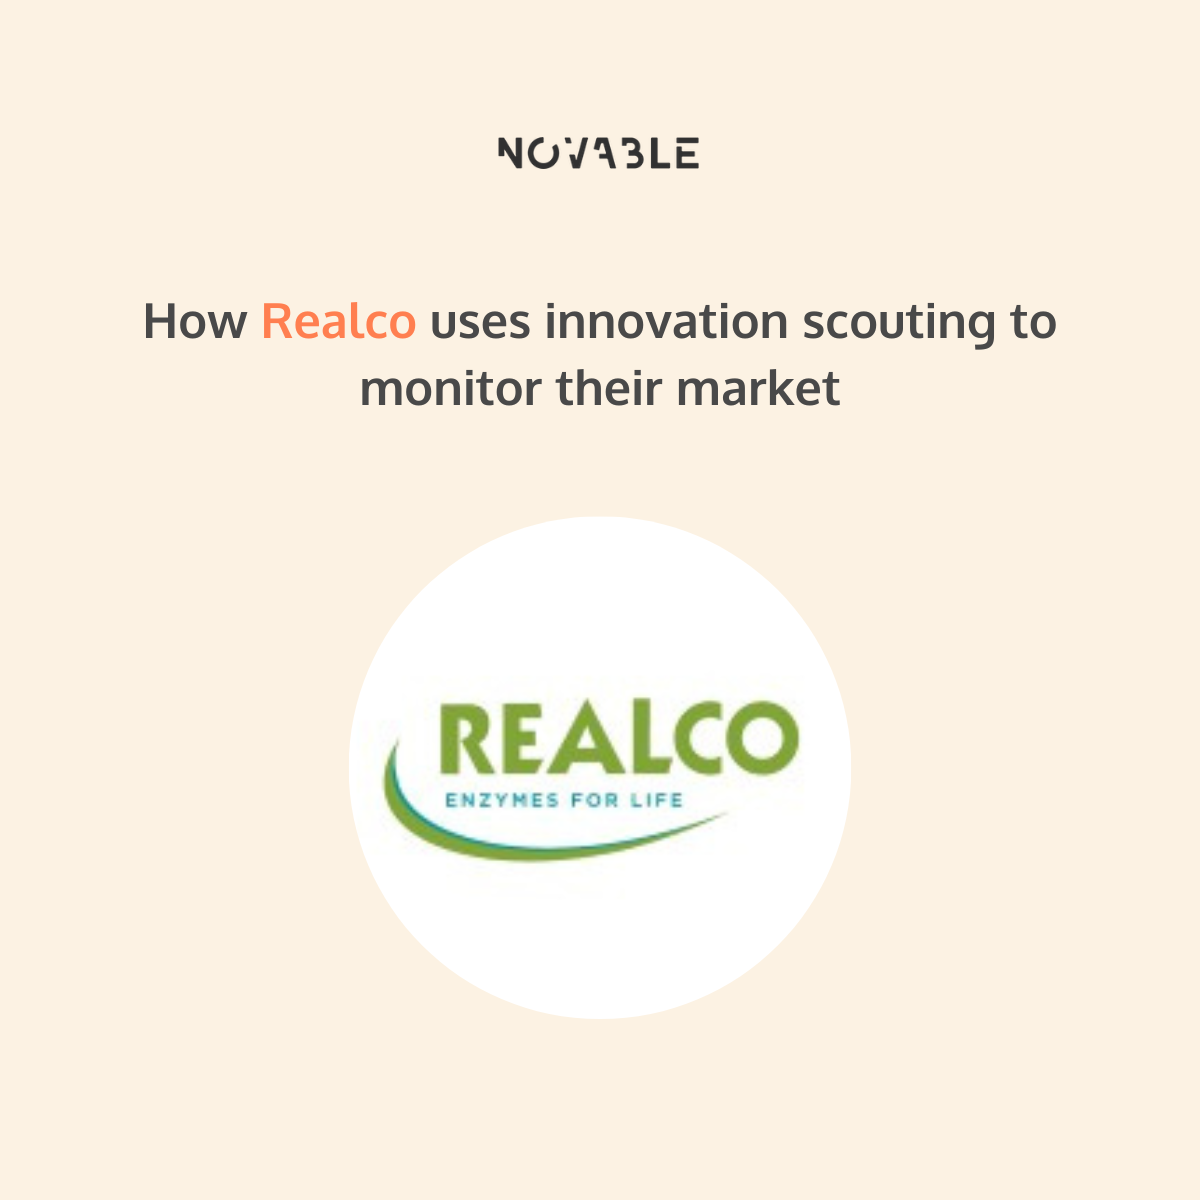 Realco for corporate innovation